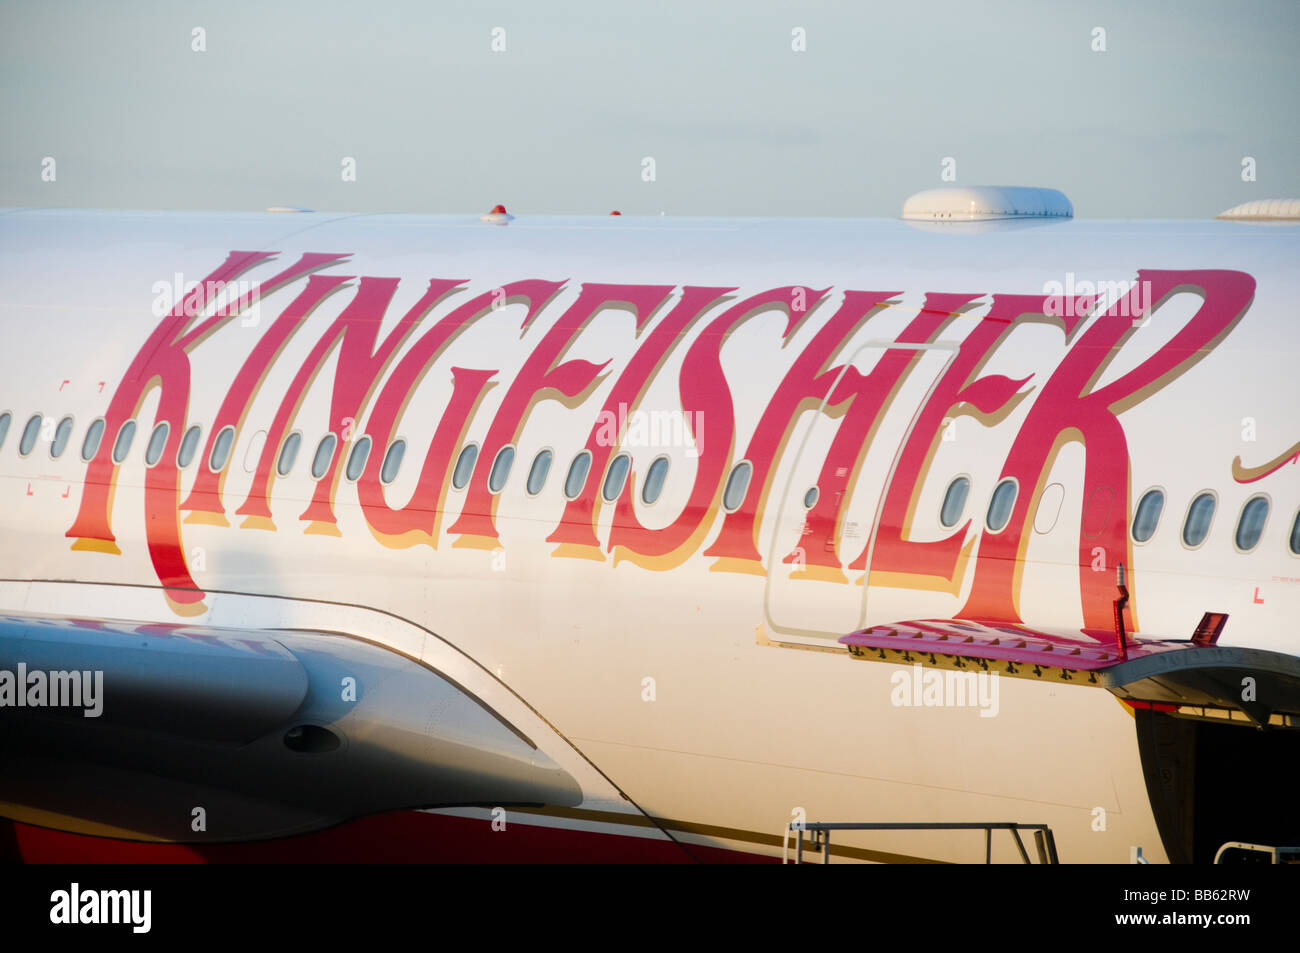 Kingfisher Airlines in India Stock Photo